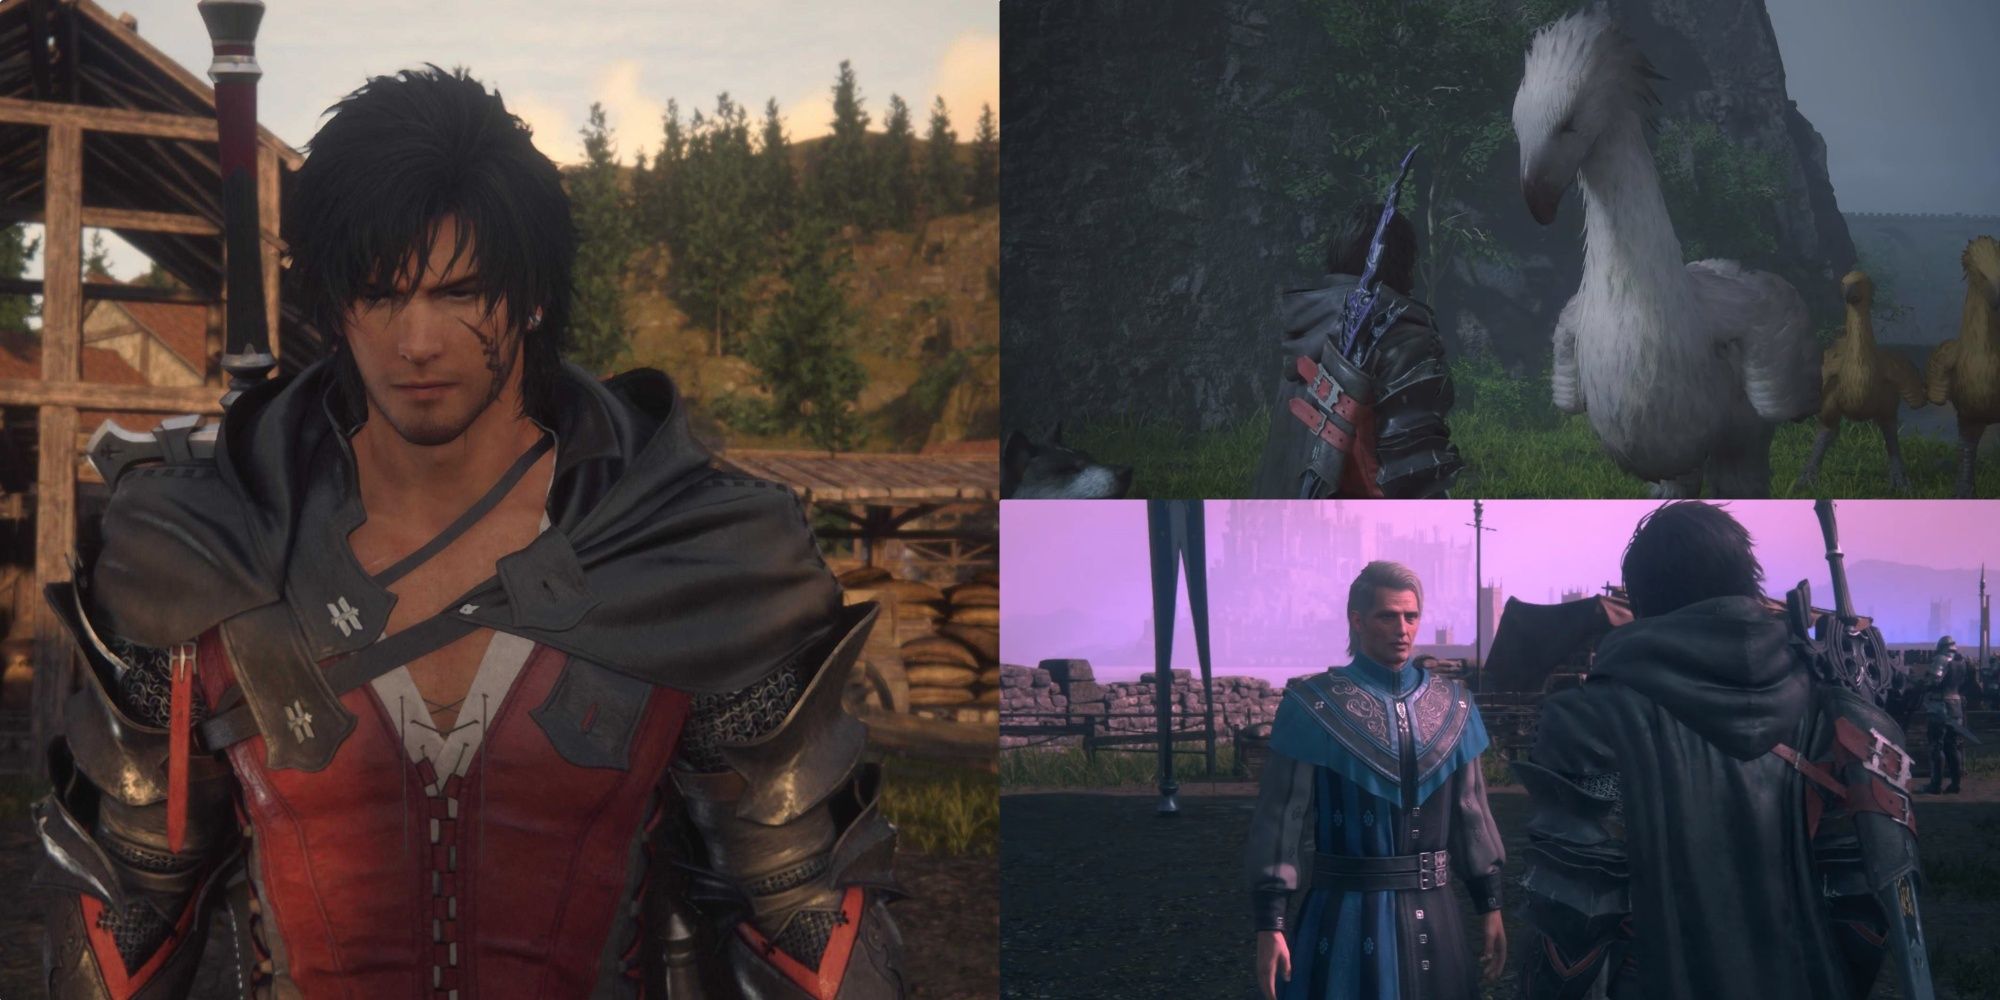 A Split image showing clive and his cutscenes from side quests